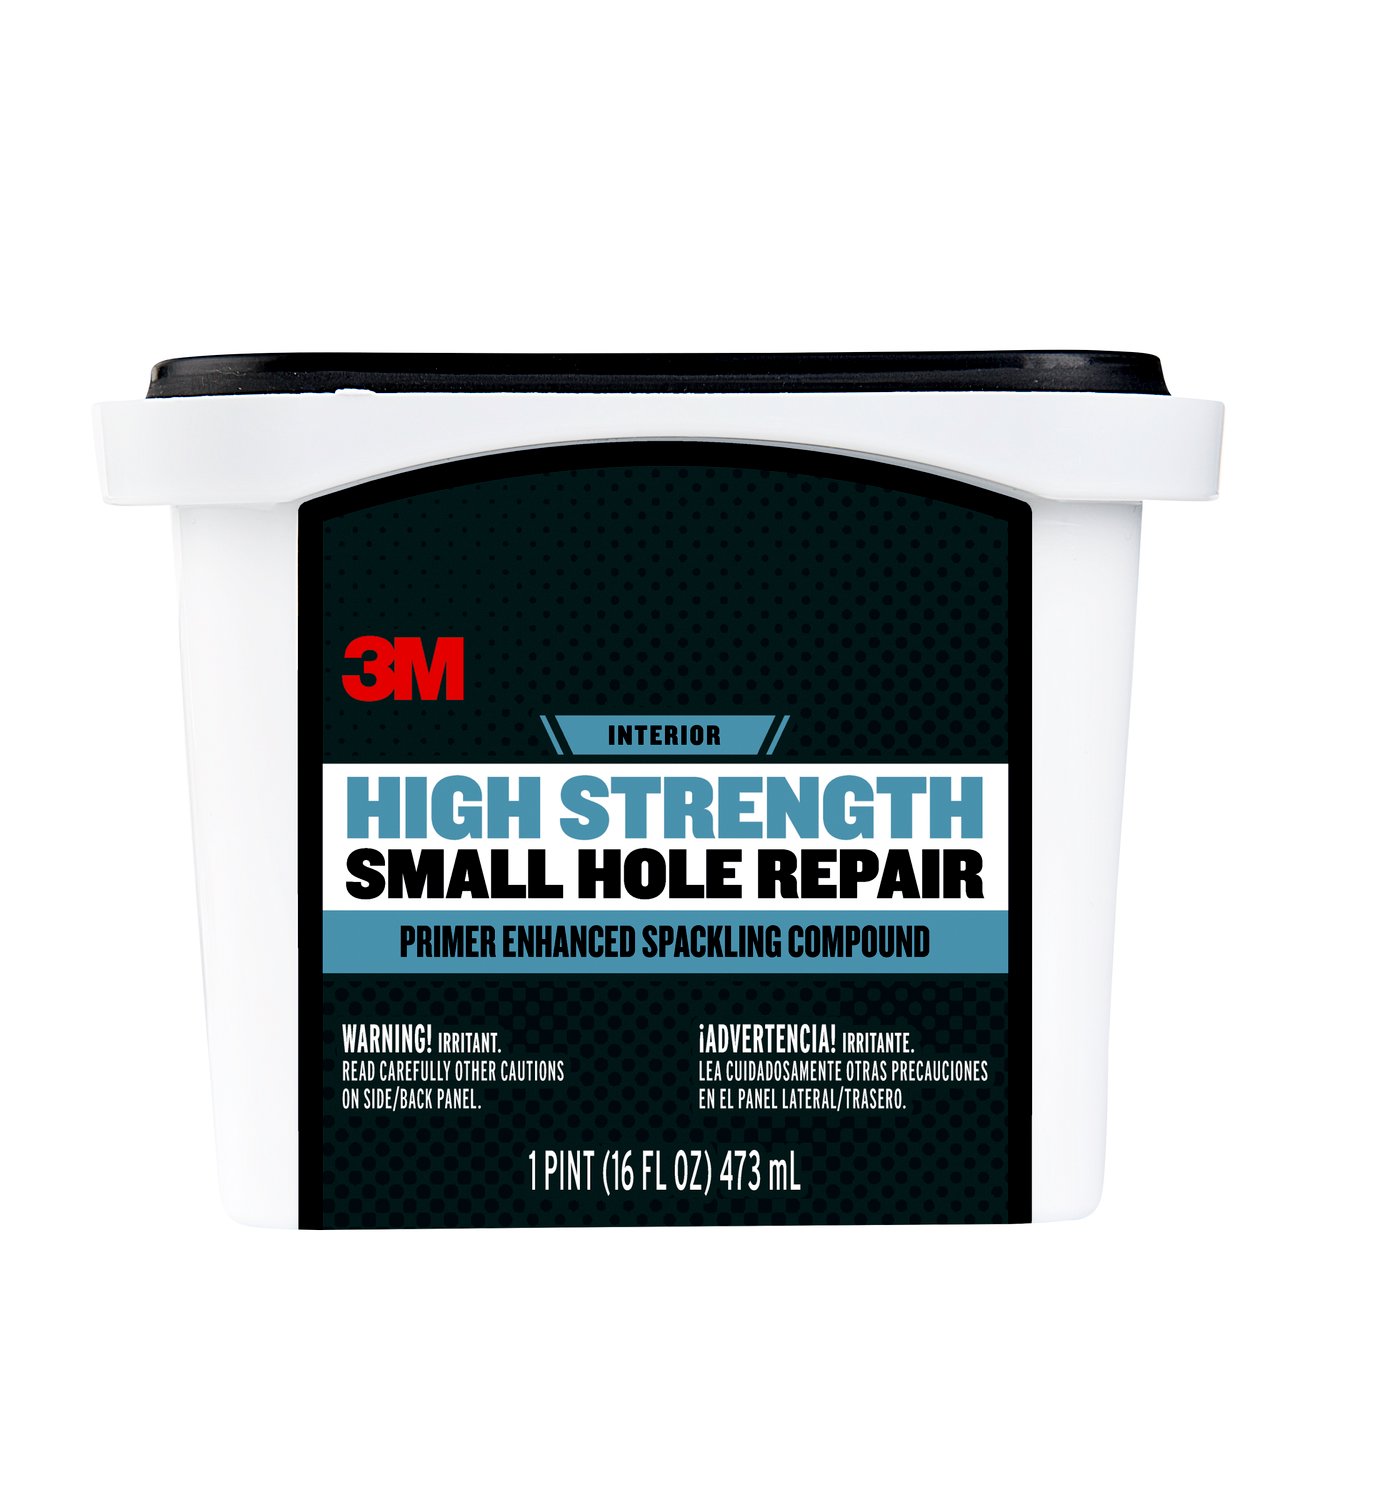 7100294884 - 3M High Strength Hole Repair Color Changing Spackling Compound CC-32-DT, 32 fl oz, 4/case